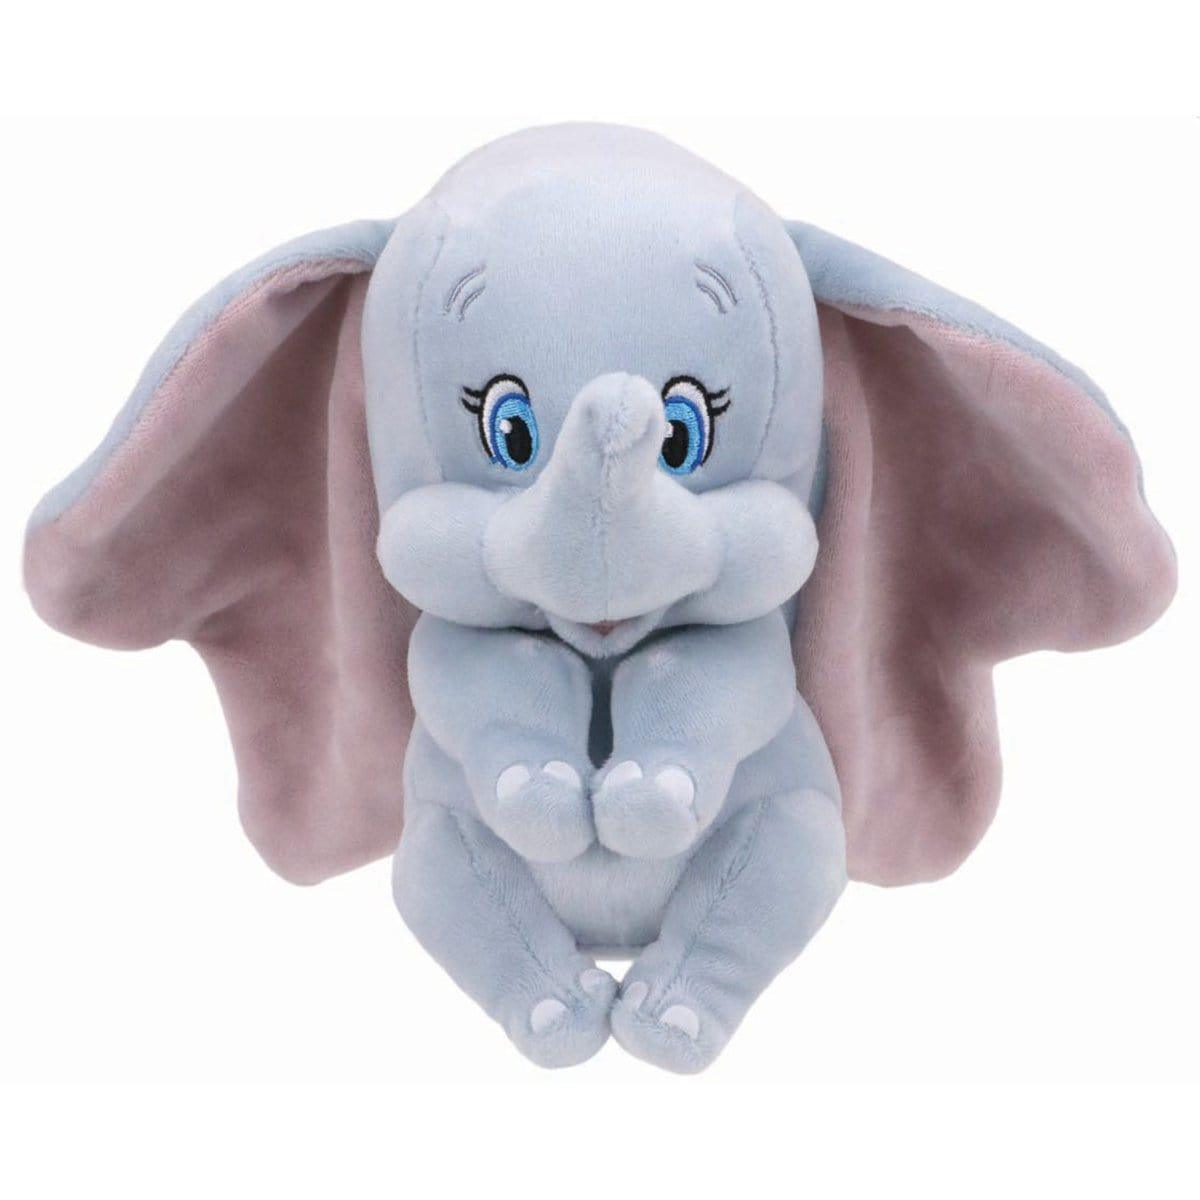 Buy Plushes Beanie Boo Large - Dumbo sold at Party Expert